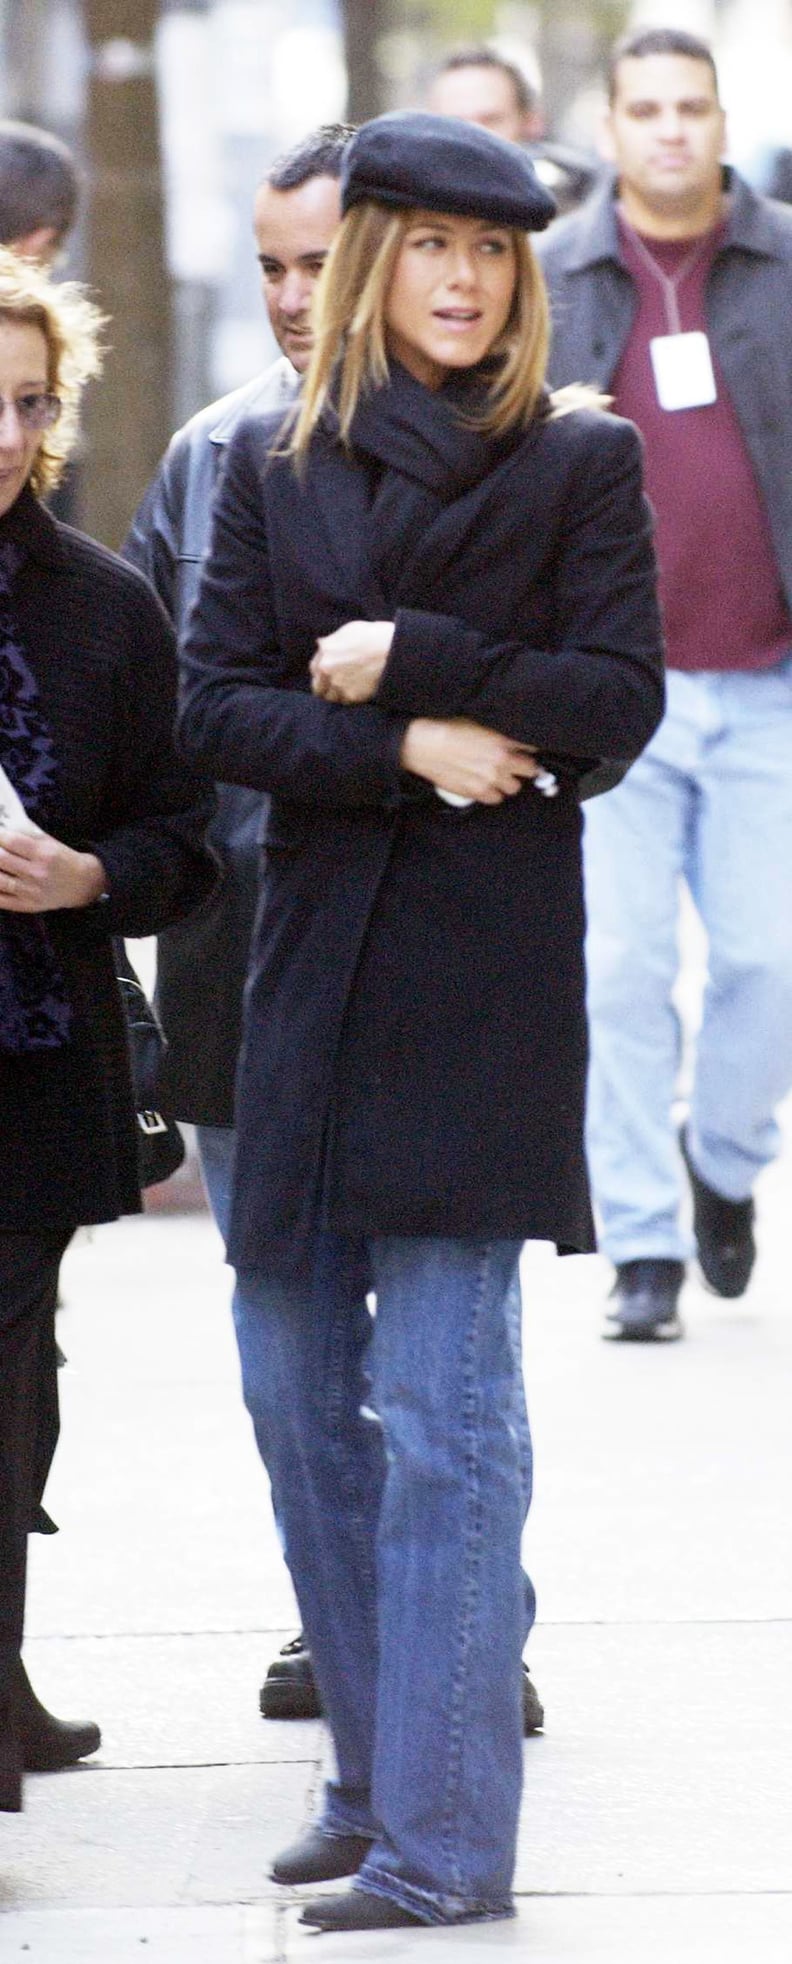 Jen Pulled off a Parisian Chic Look in 2004 By Wearing Her Jeans With a Beret